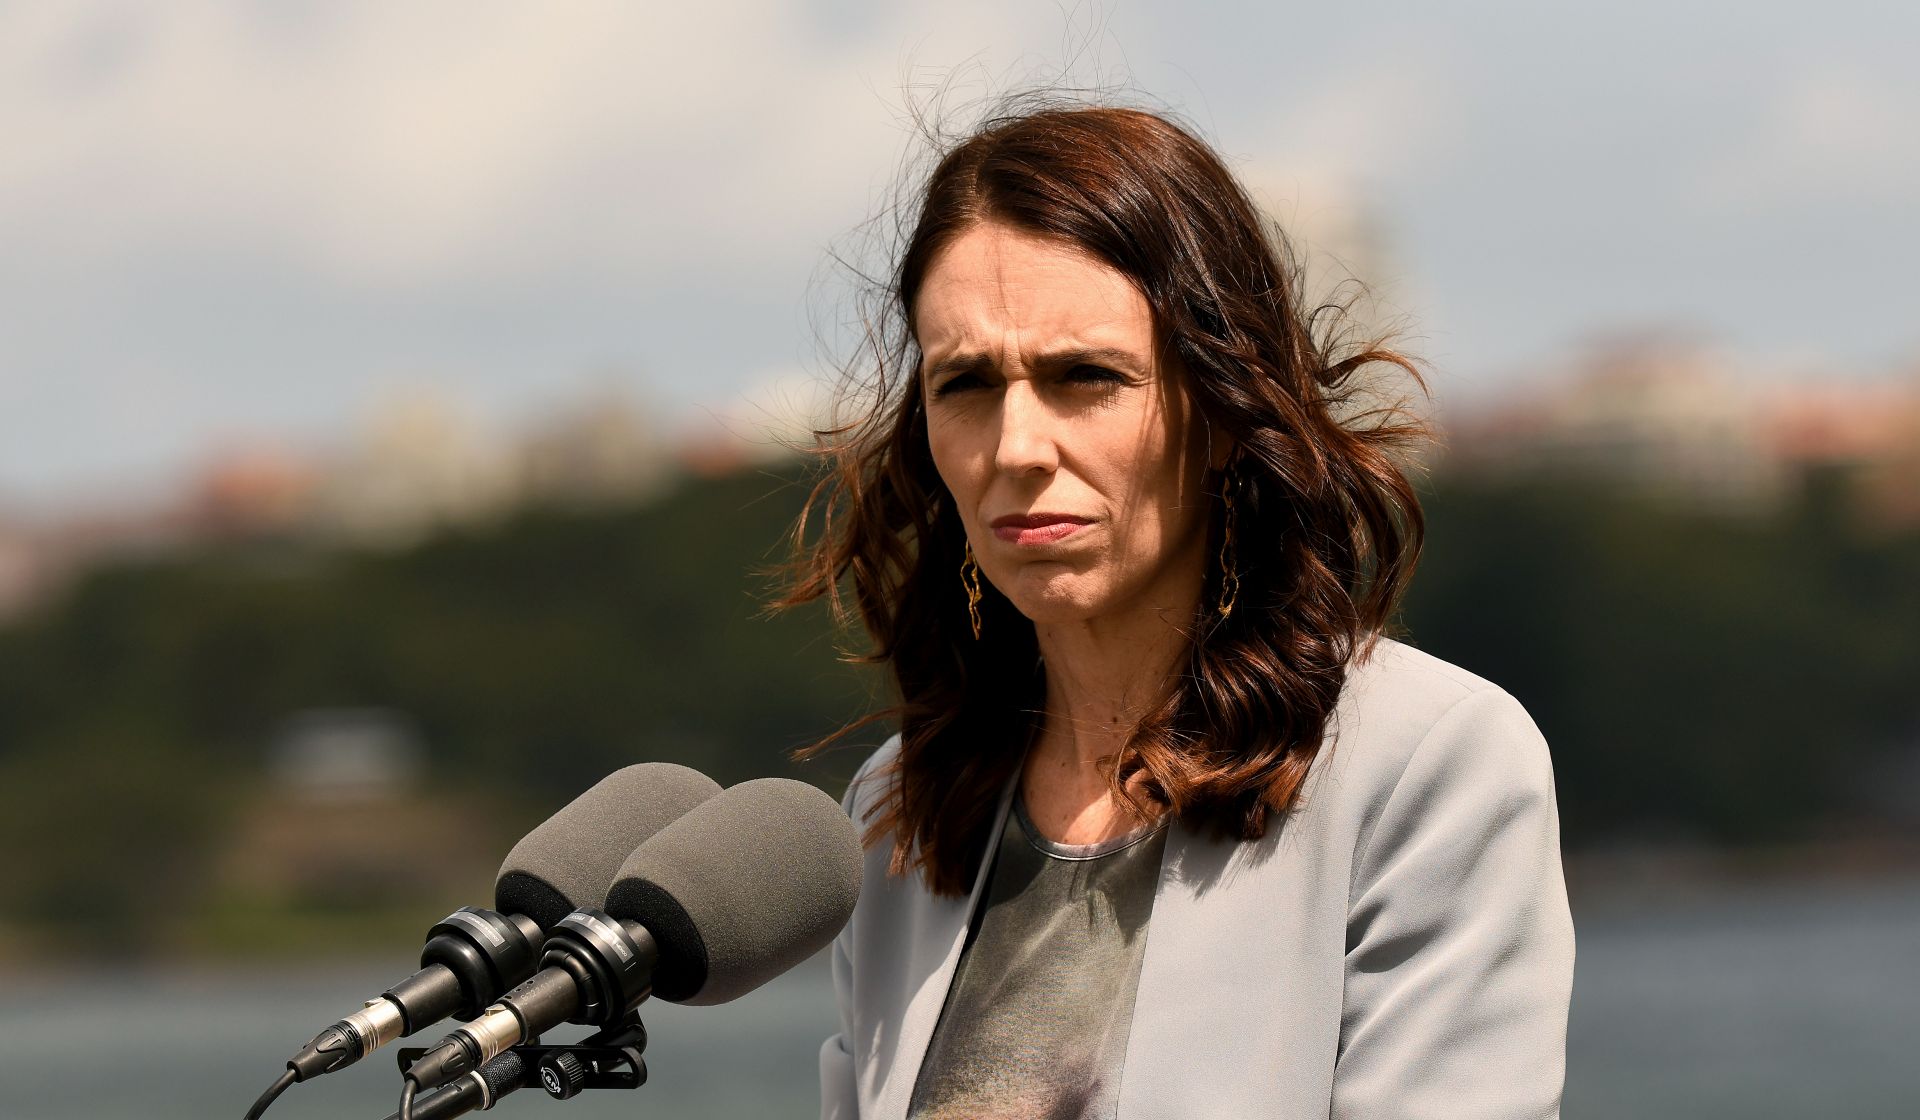 epa08401784 (FILE) - New Zealand Prime Minister Jacinda Ardern attends a press conference with Australian Prime Minister Scott Morrison (not pictured) at Admiralty House in Sydney, Australia, 28 February 2020 (reissued 05 May 2020). According to media reports, Australia and New Zealand discussed on 05 May about introducing a trans-Tasman bubble to allow travel between the two countries. The plan was set in motion after Ardern reportedly stressed out that the New Zealand border will be closed for a long time, amid the ongoing coronavirus pandemic.  EPA/BIANCA DE MARCHI  AUSTRALIA AND NEW ZEALAND OUT